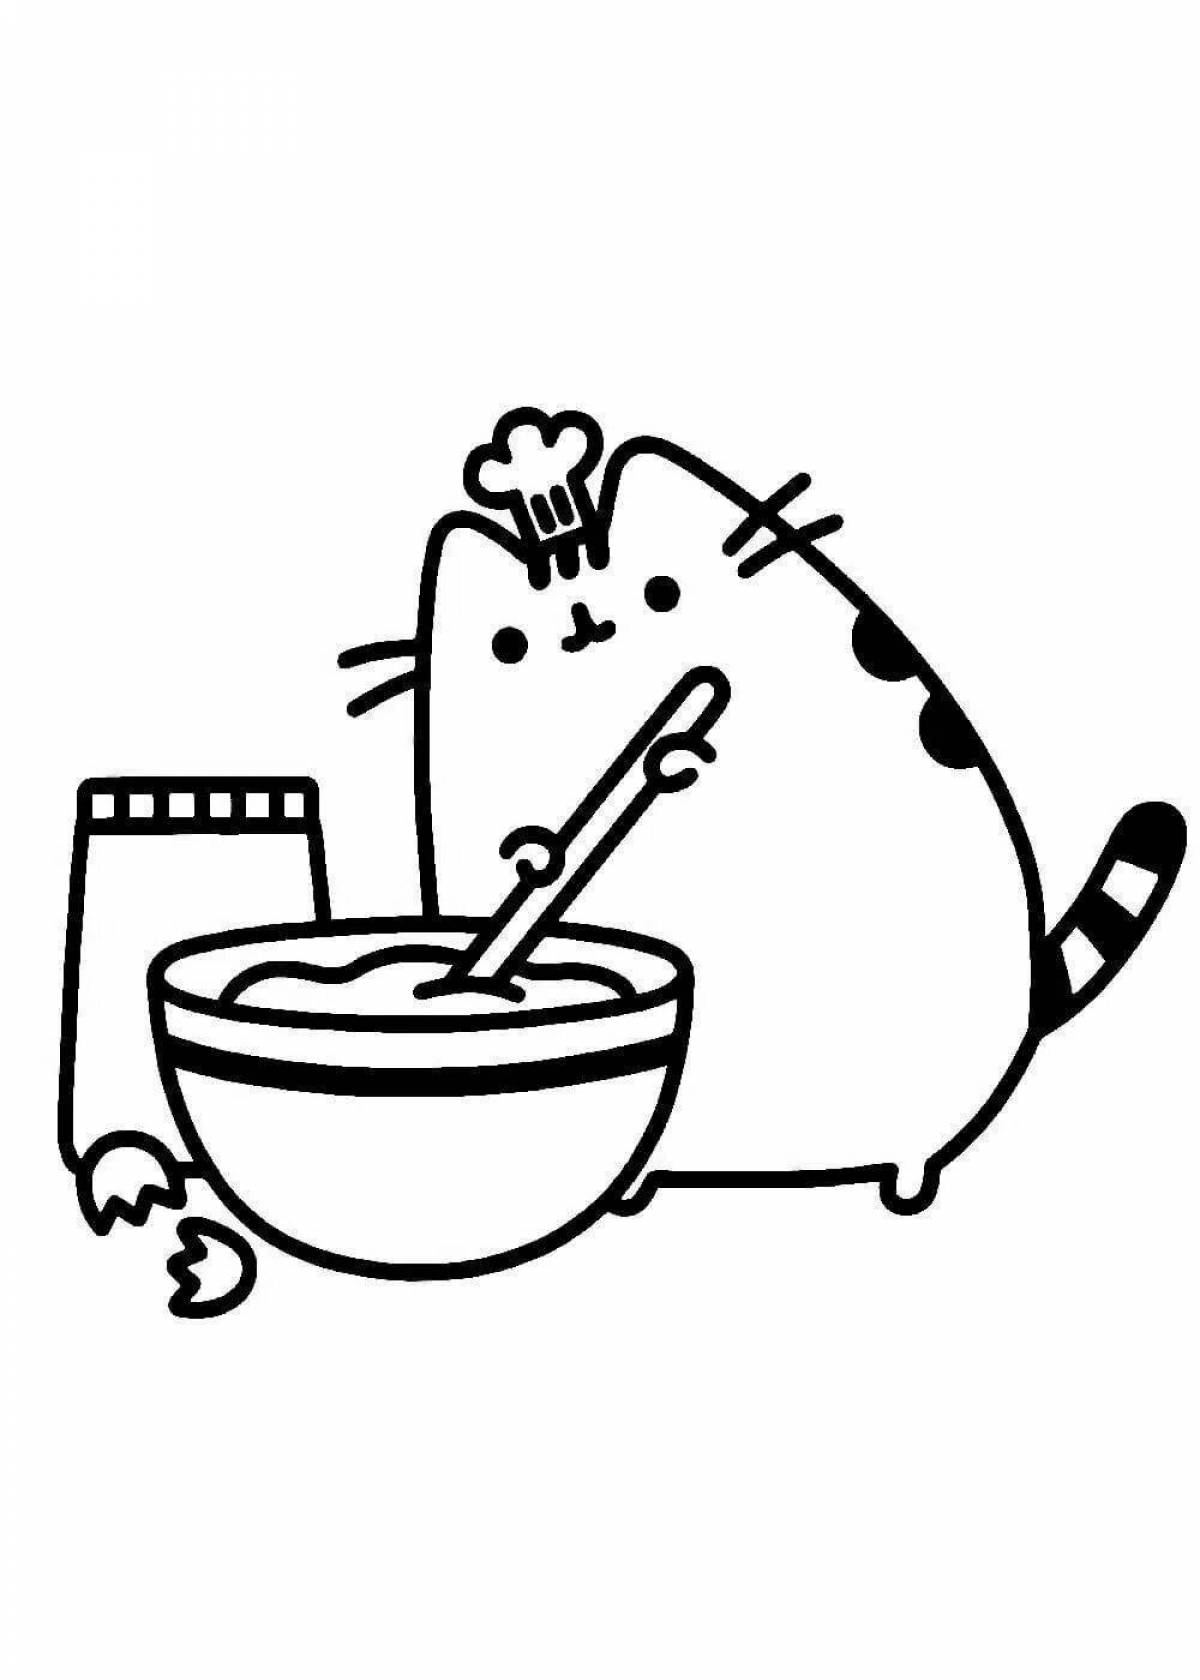 Adorable Pusher Cat Coloring Page